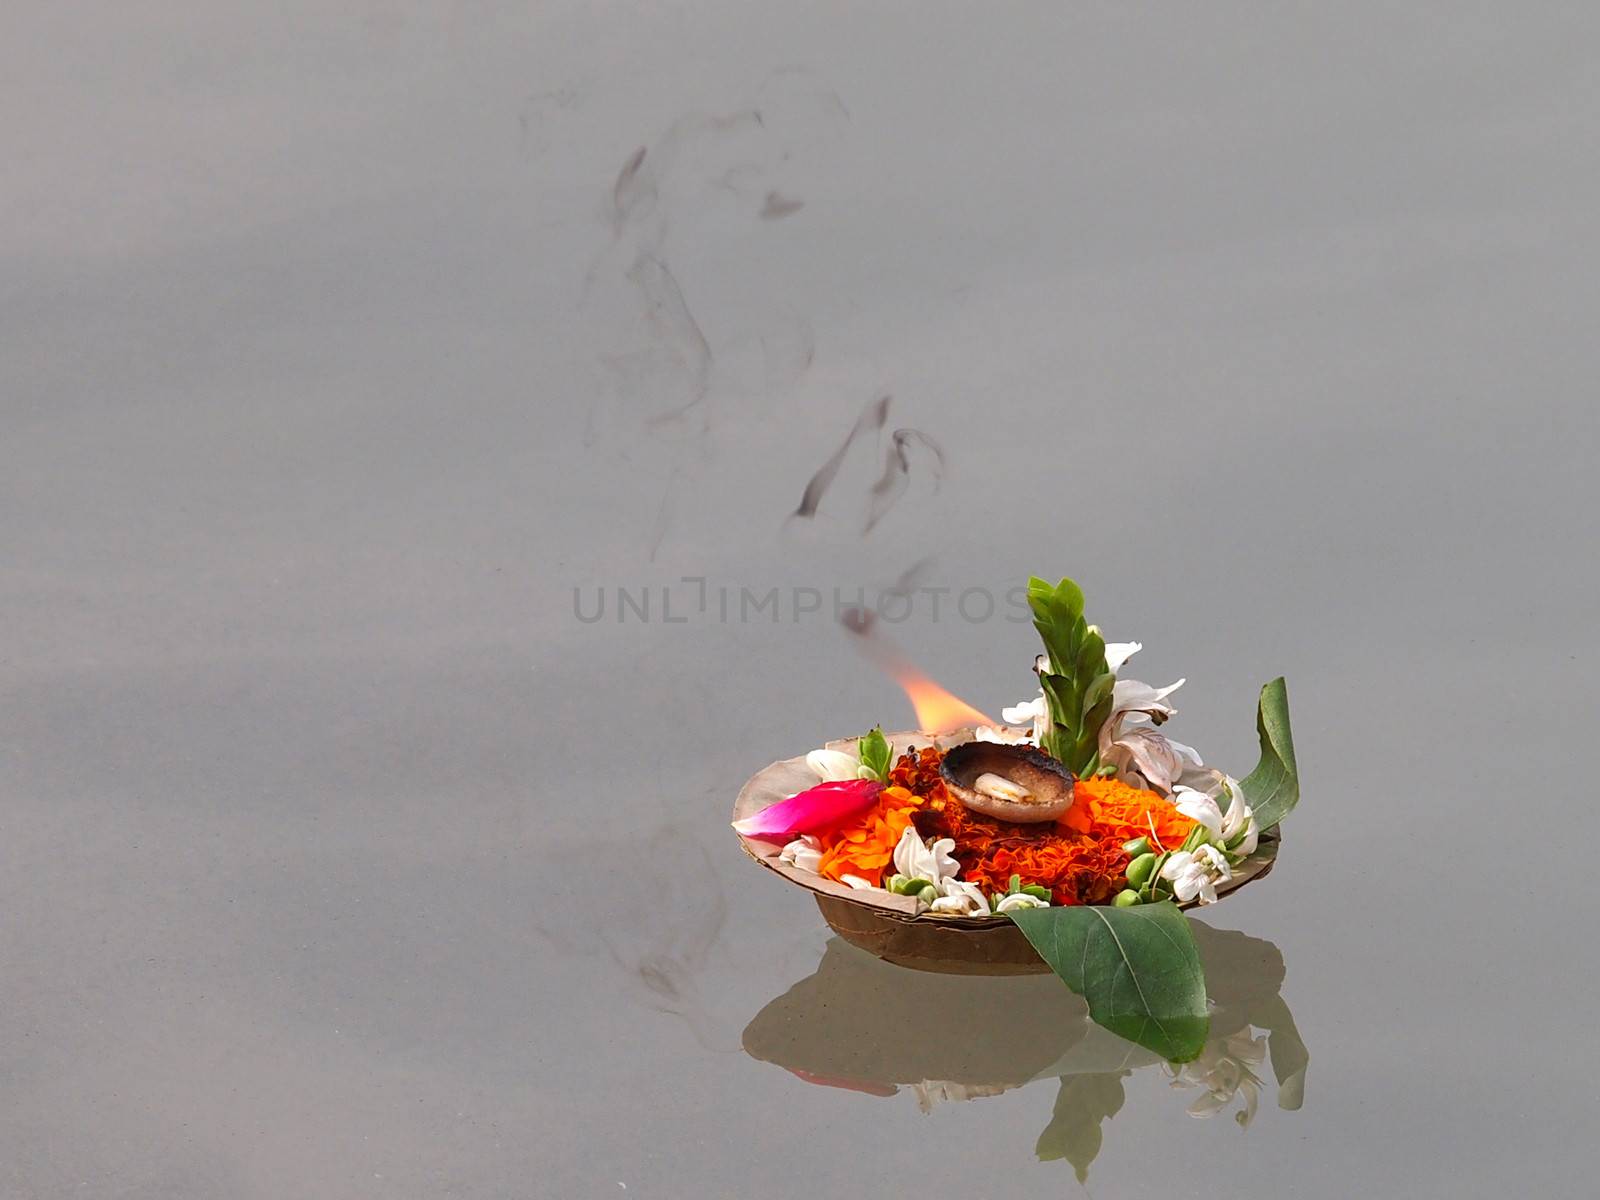 flowers and candles on the ganges river in the india      